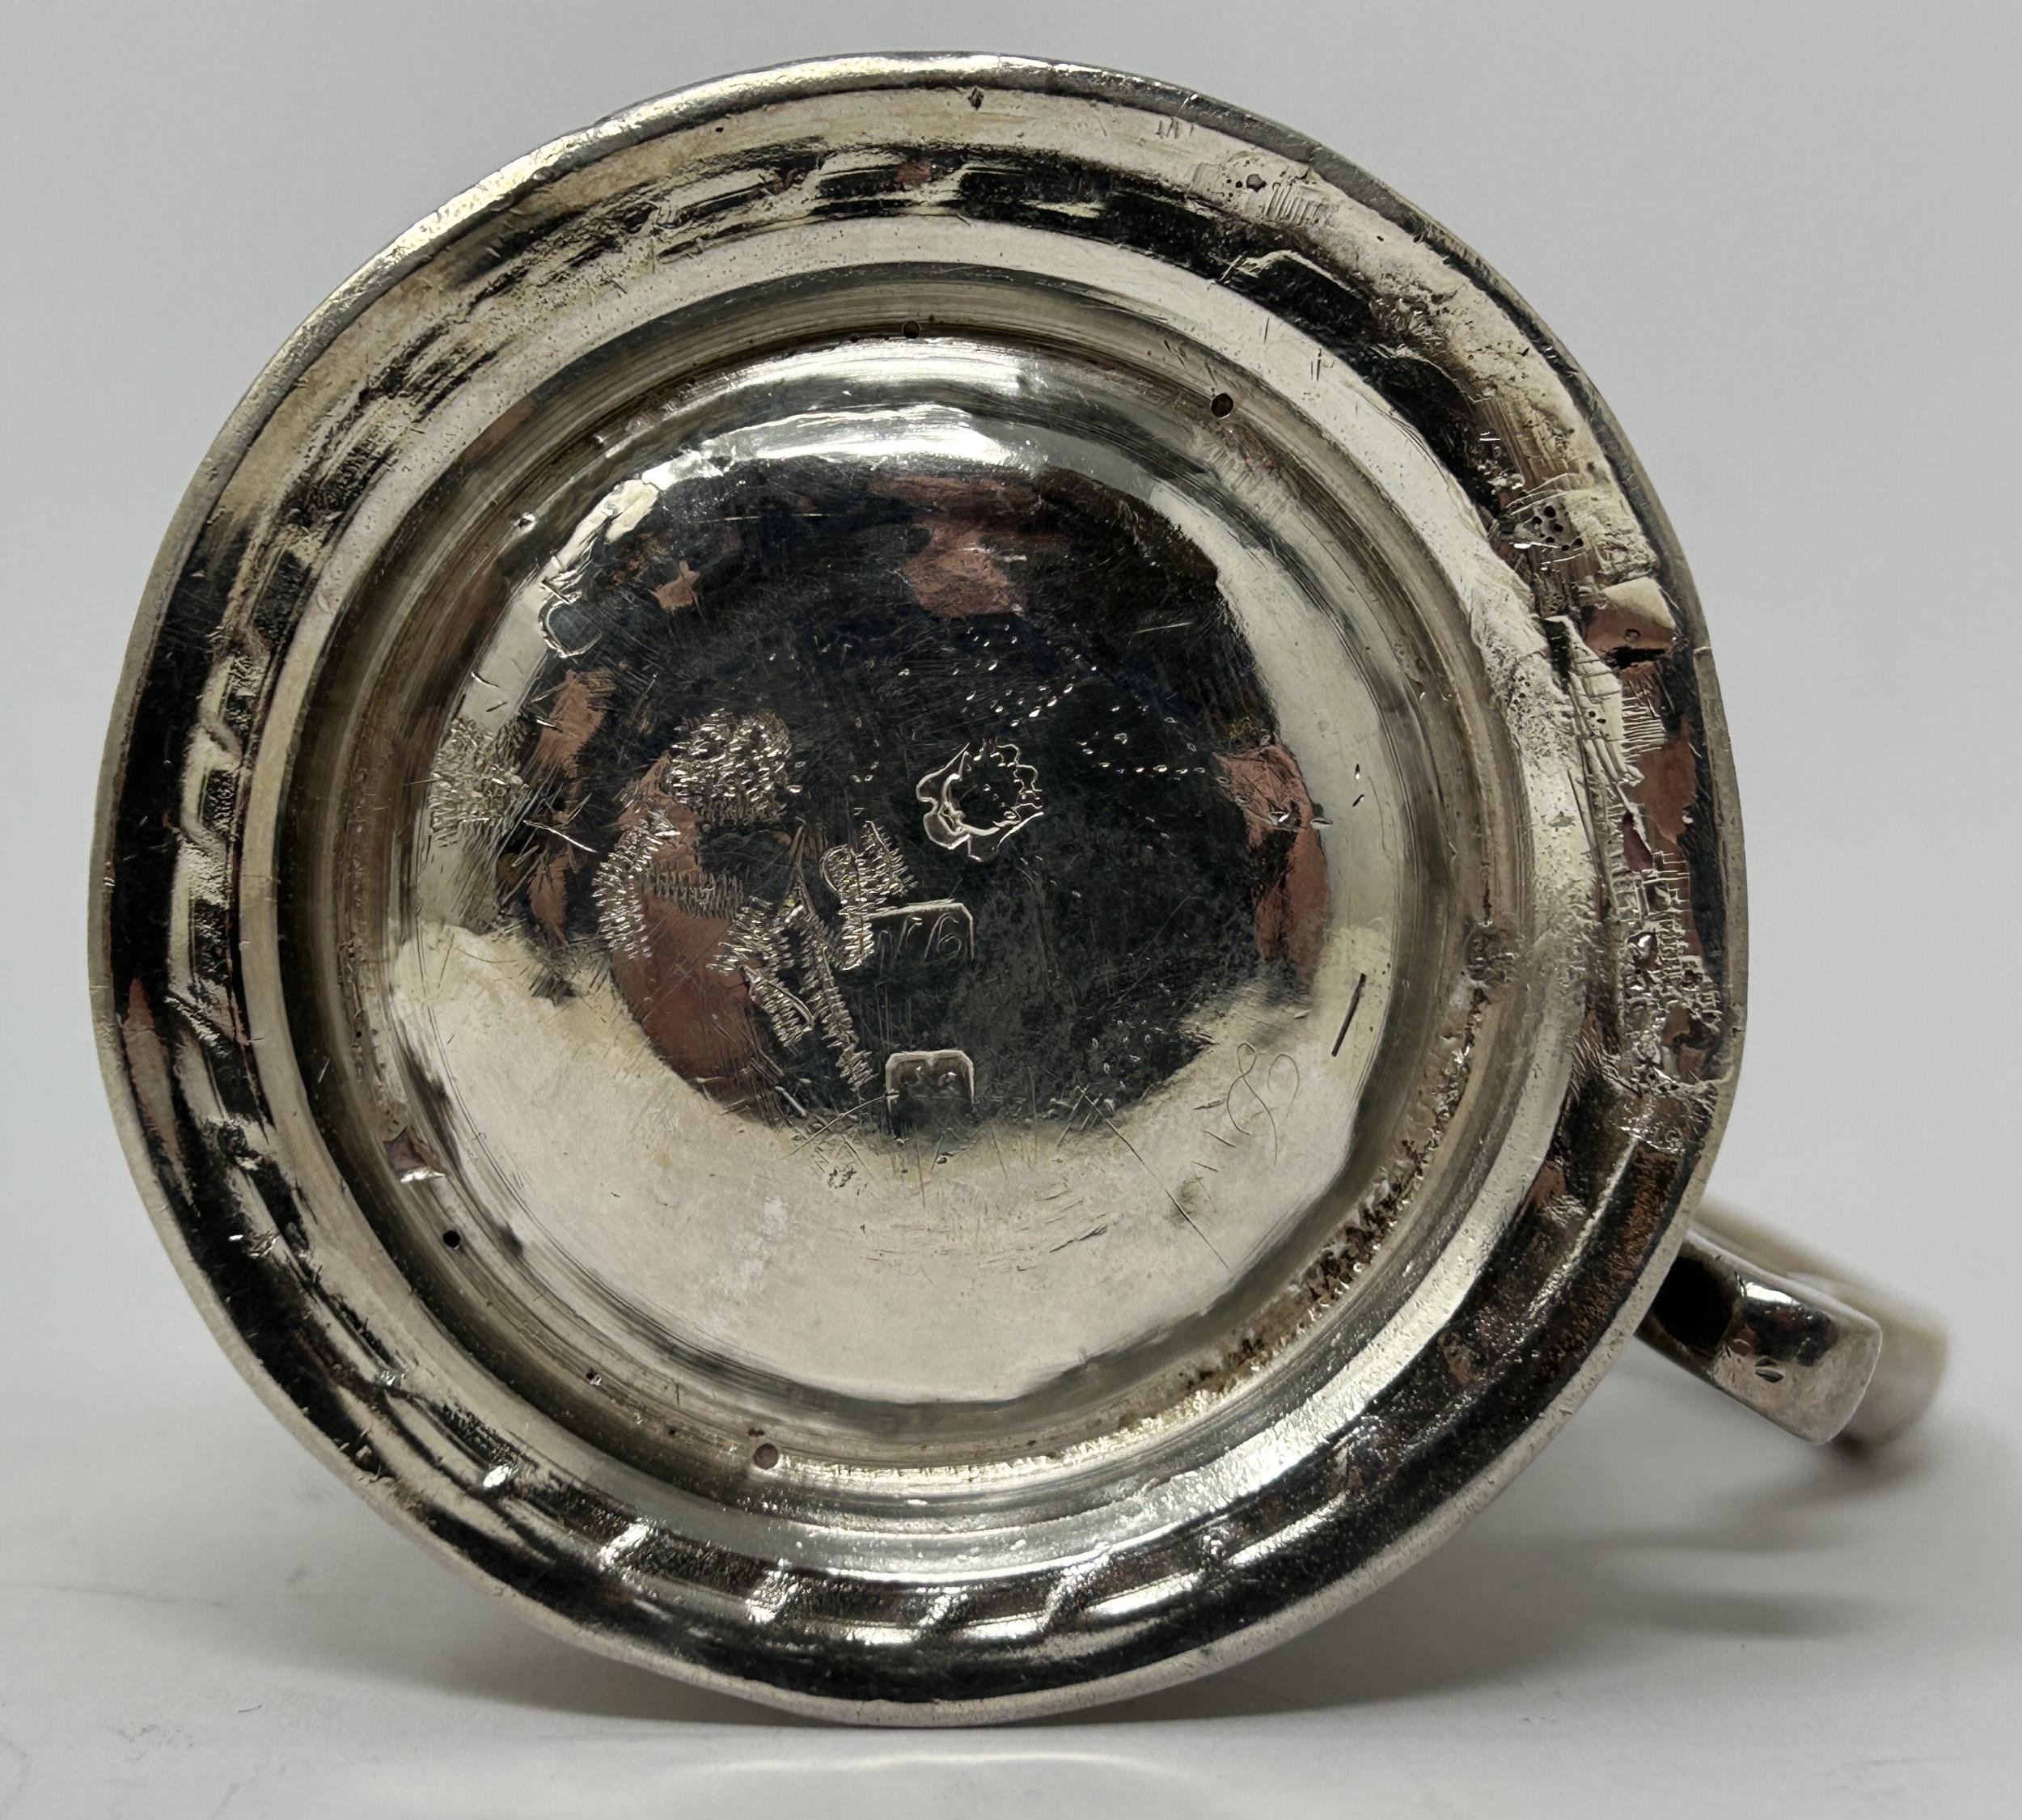 A George III silver mug, marks rubbed, later decorated, 5.1 ozt - Image 5 of 6